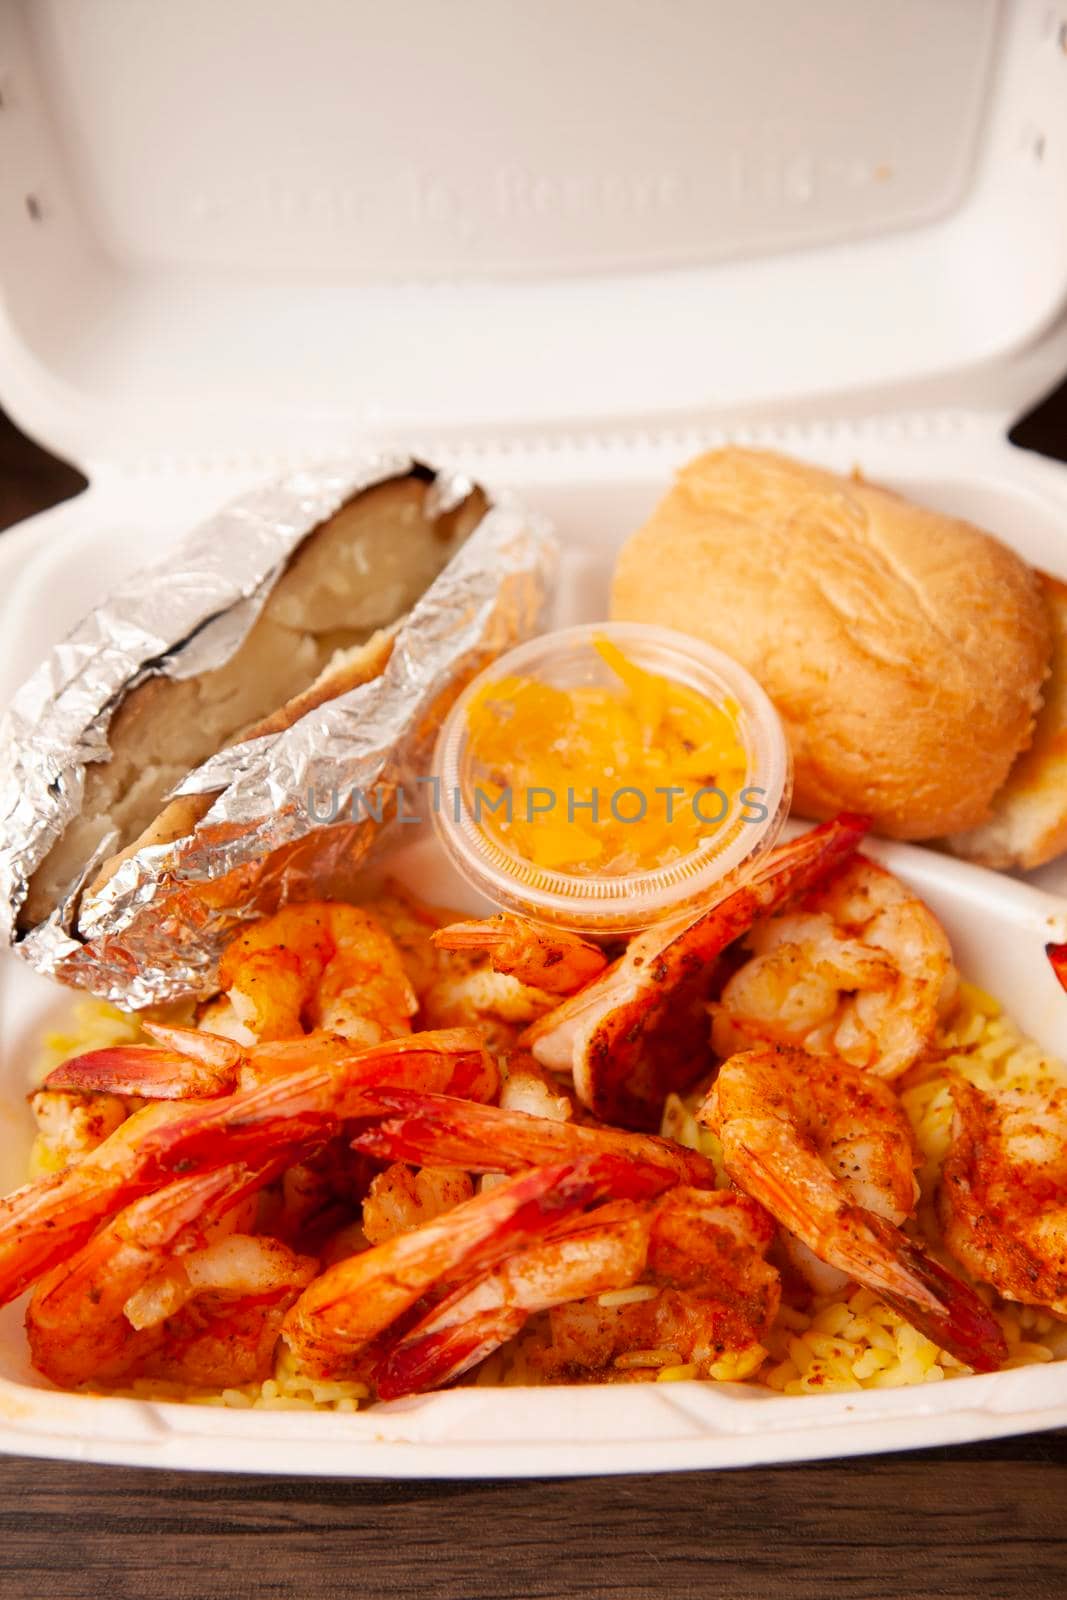 Grilled shrimp, baked potato, and roll with a container of sauce in a white, styrofoam carryout box